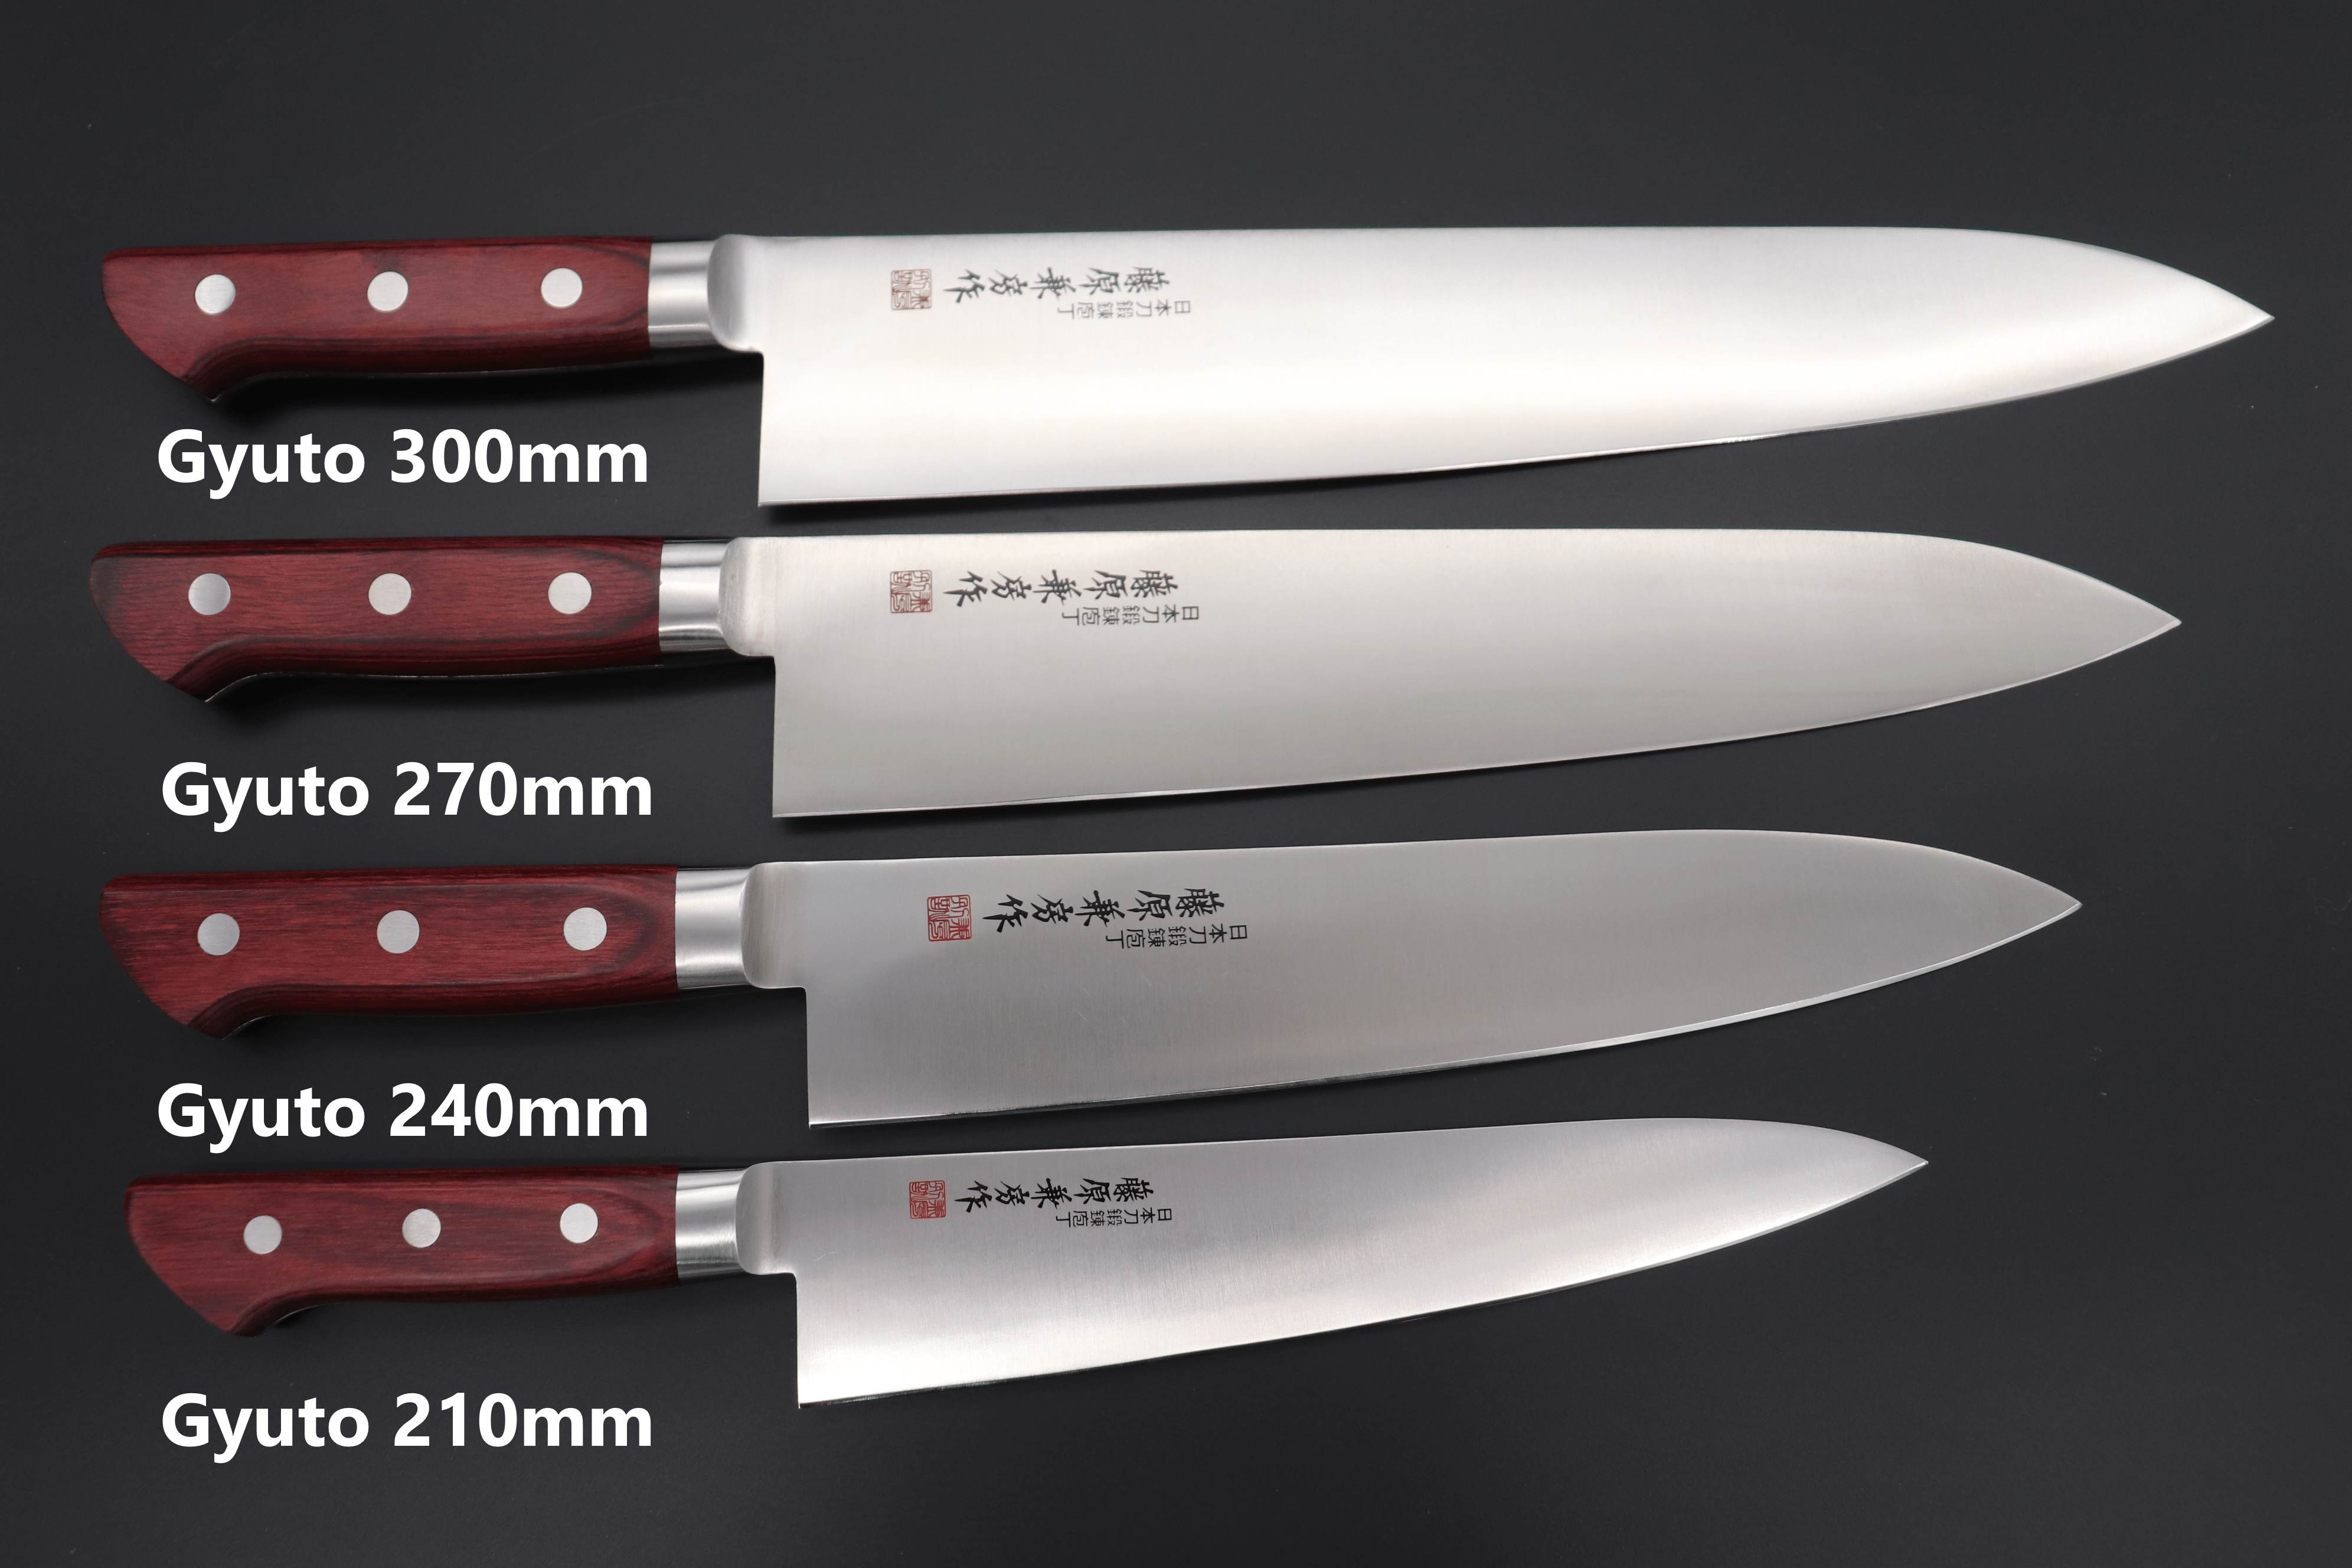 Set of 4 Left-Handed Knives with Comfort Handles